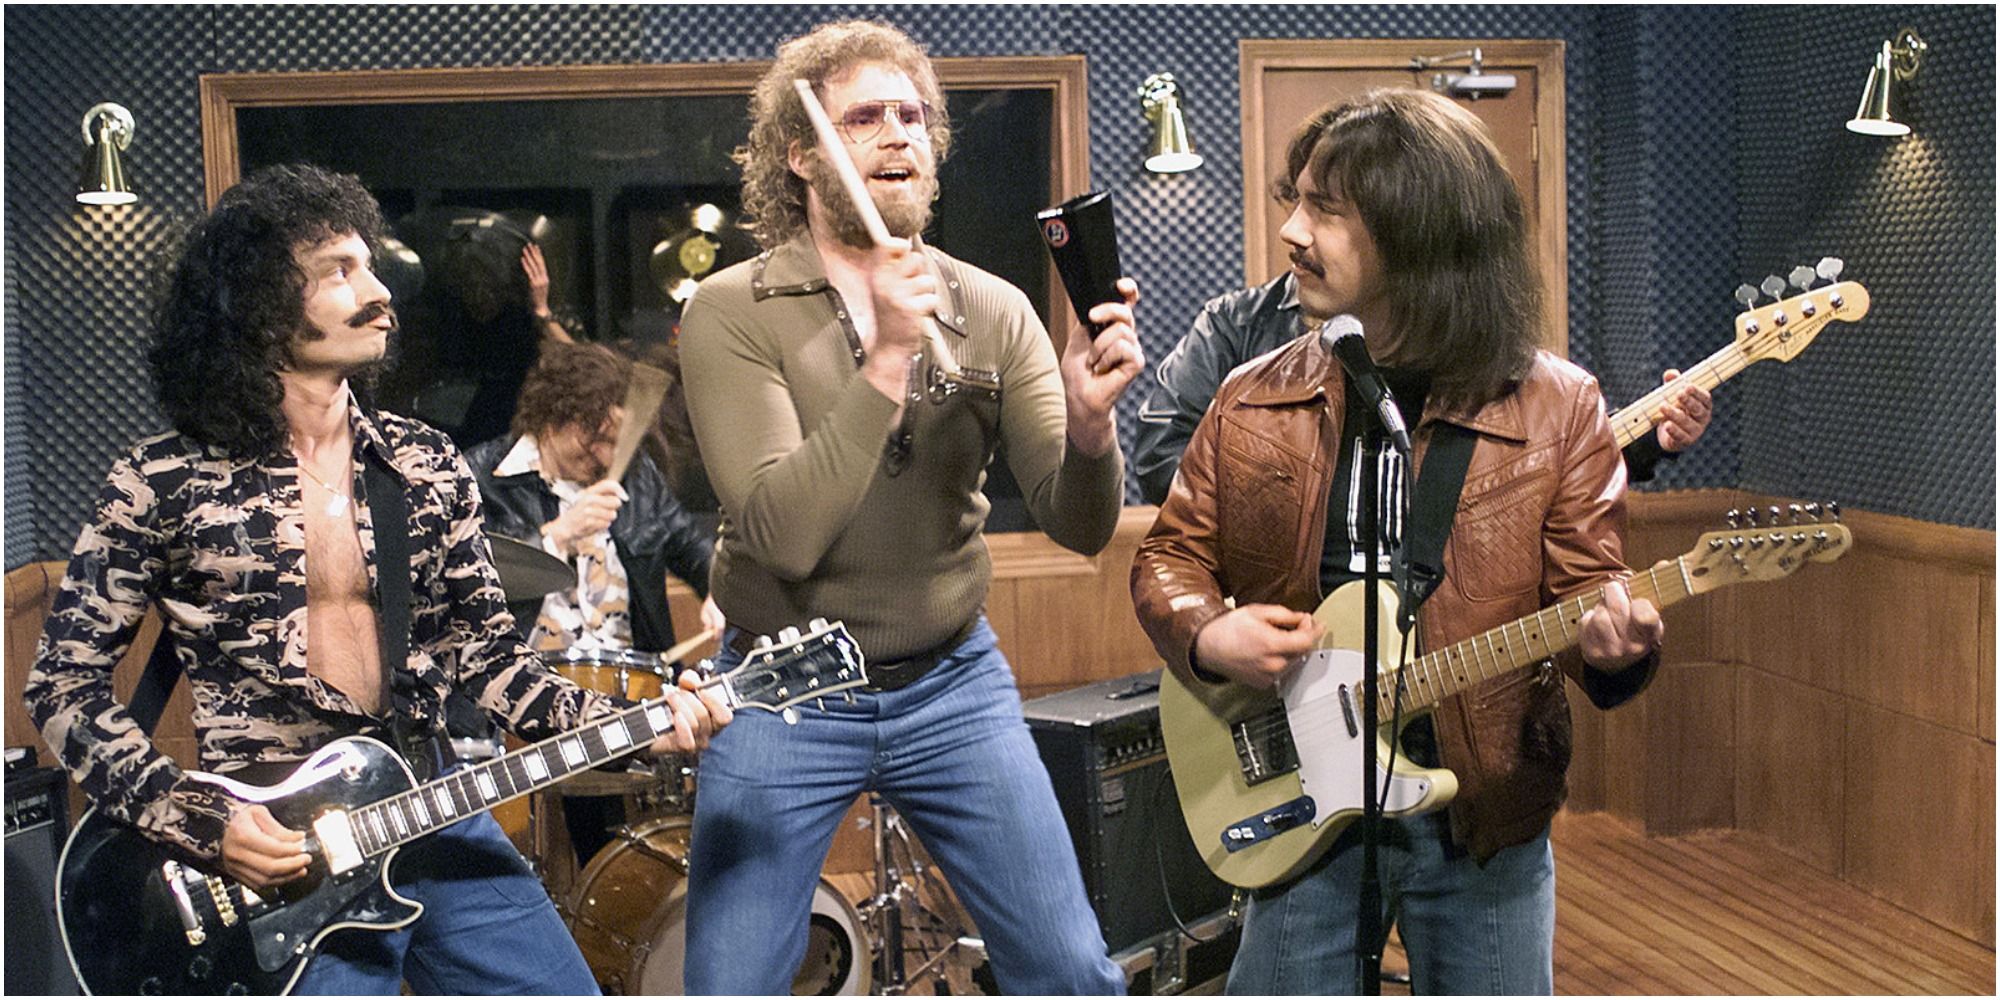 A screenshot of Blue Oyster Cult with Will Ferrell's Gene Frenkle jamming during the "More Cowbell" sketch in Saturday Night Live